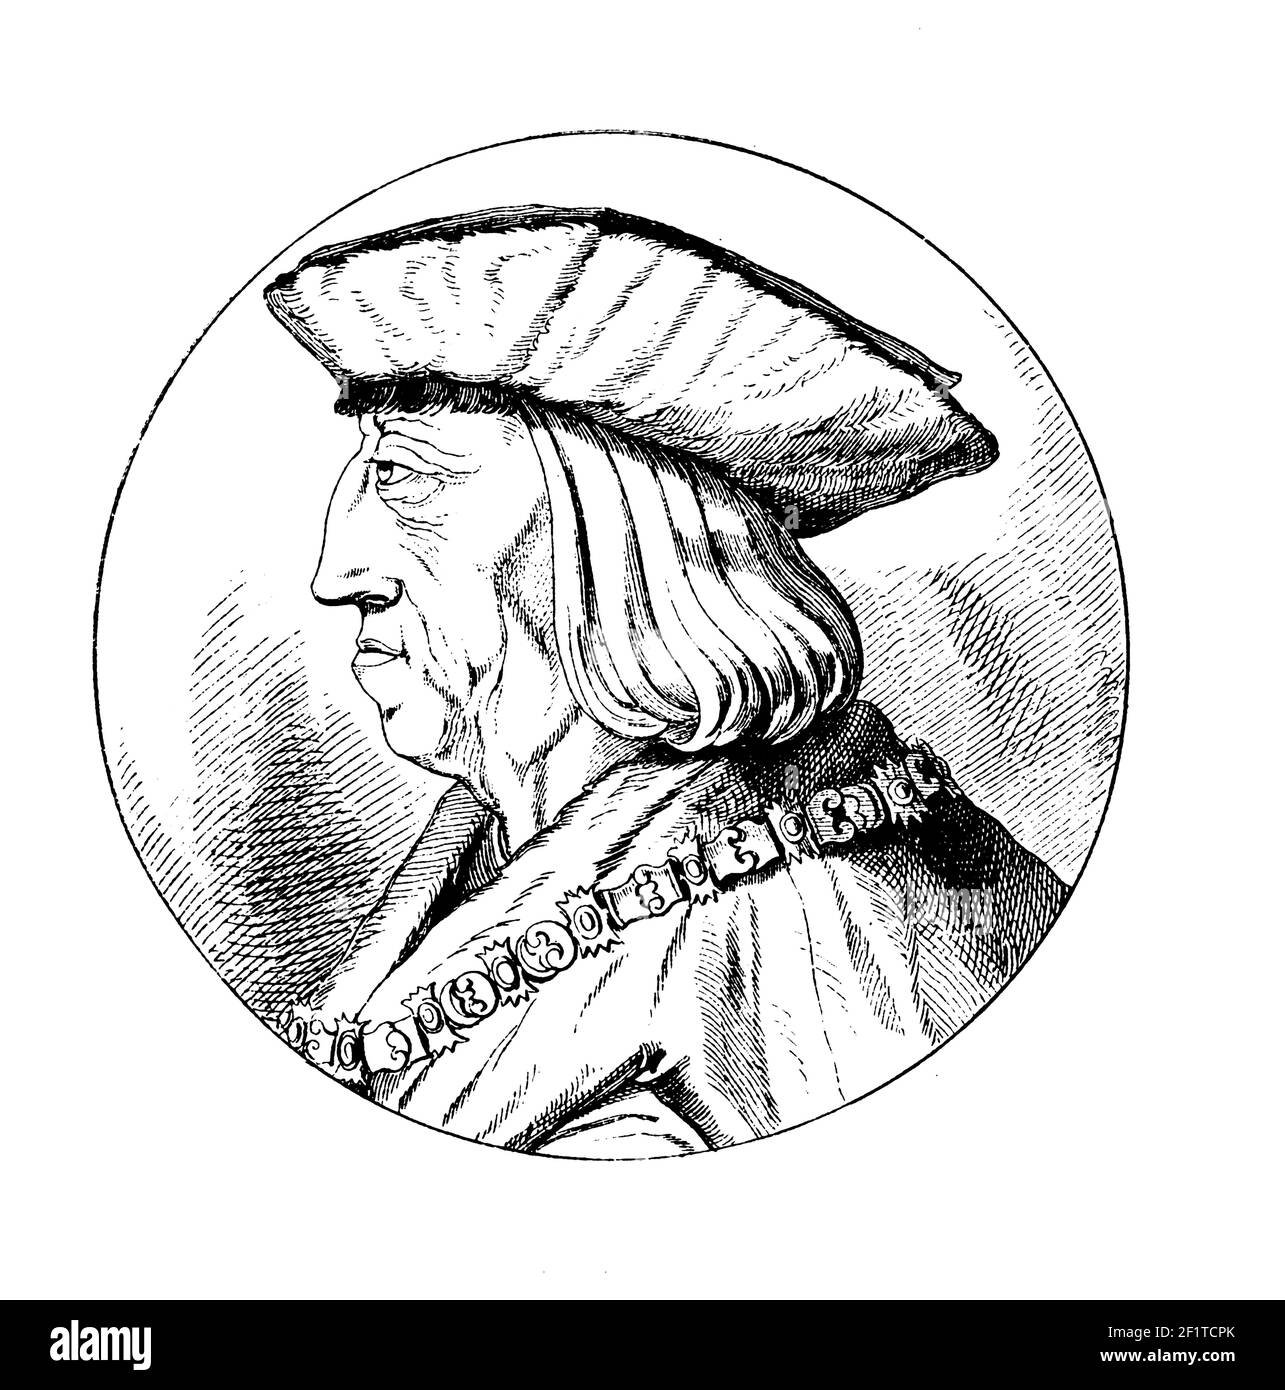 Vintage engraving of a portrait of Maximilian I, Holy Roman Emperor. He was born on March 22, 1459 in Wiener Neustadt, Austria and died on January 12, Stock Photo